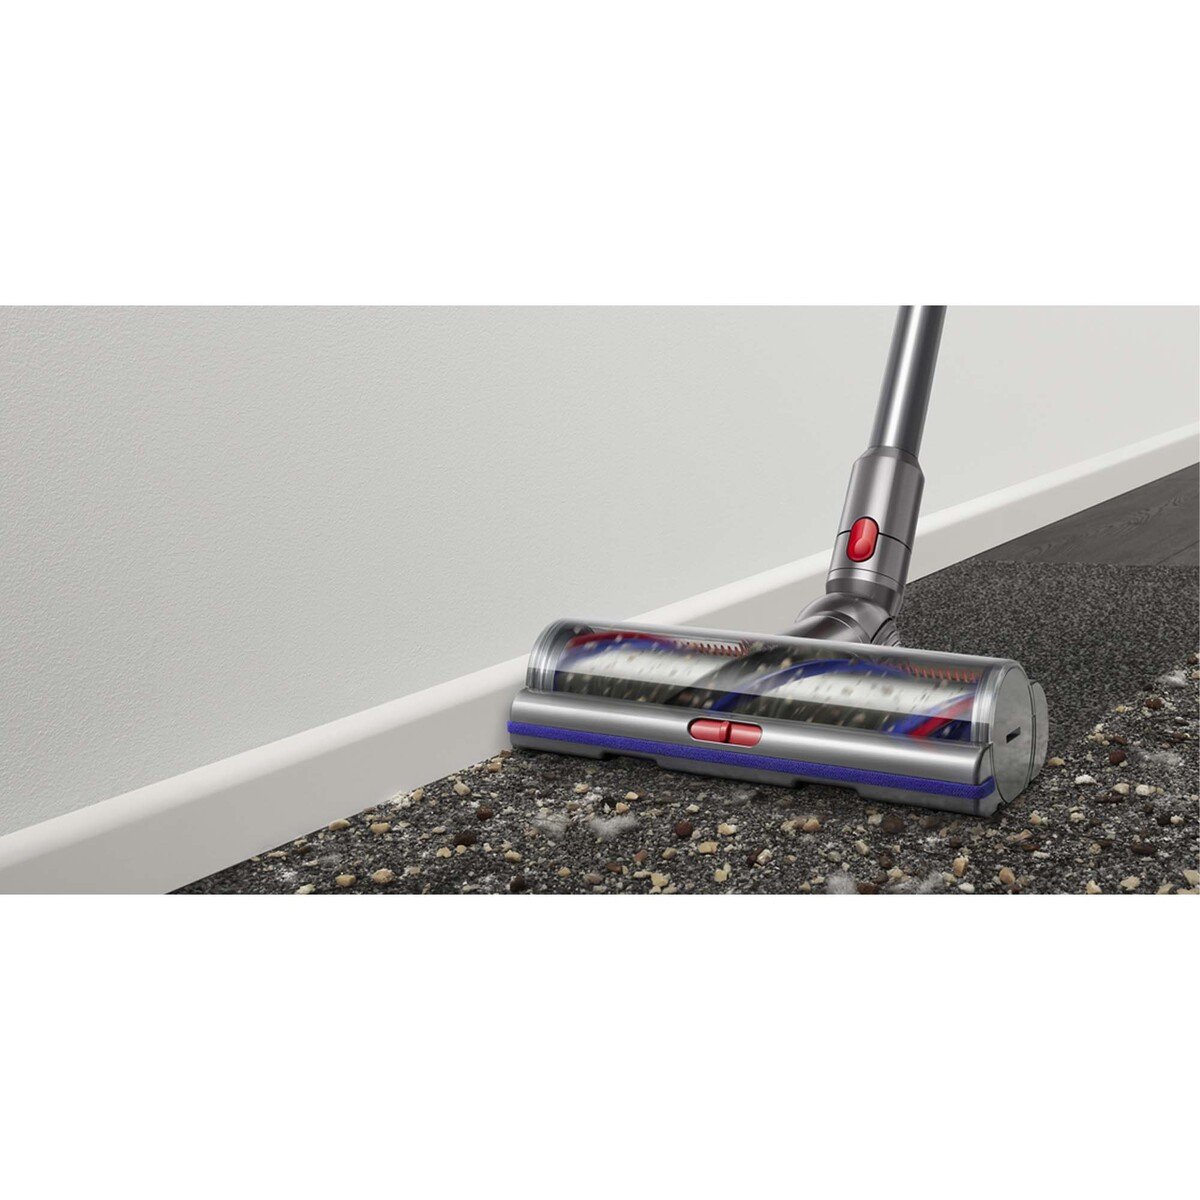 Dyson V15 Detect Absolute Cordless Vacuum Cleaner